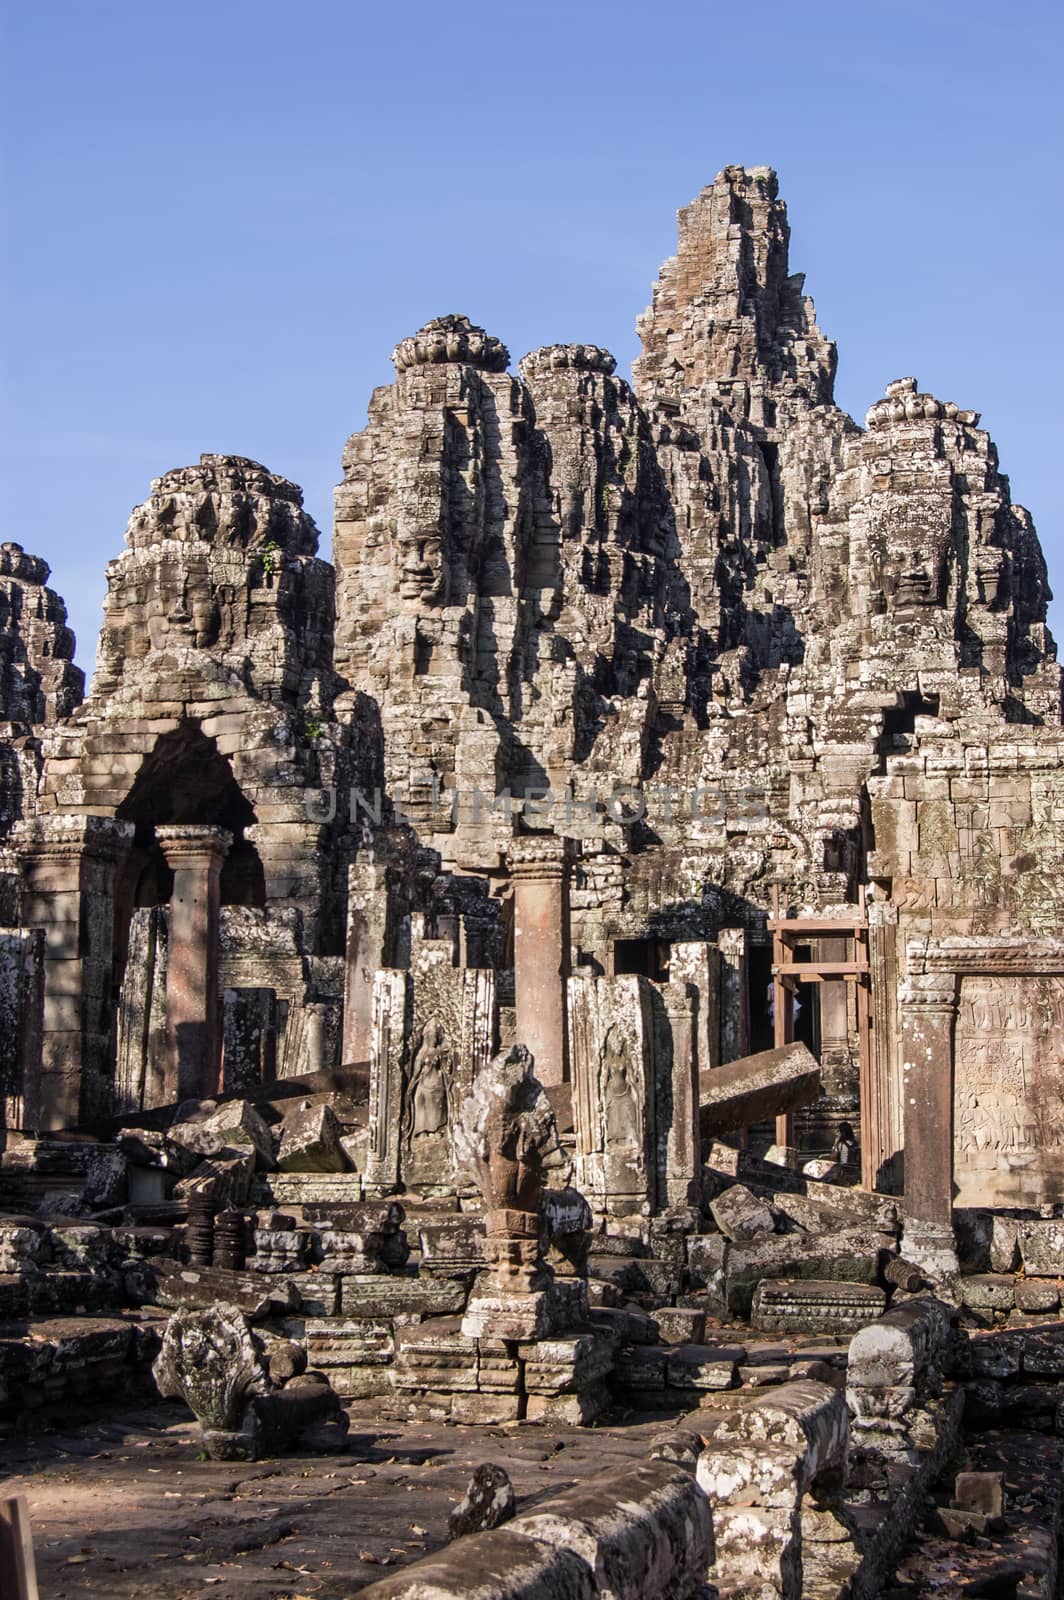 Bayon Temple, Angkor Thom, Siem Reap, Cambodia. Vertical view of the ancient Khmer Temple famous for the serene faces carved on its towers.